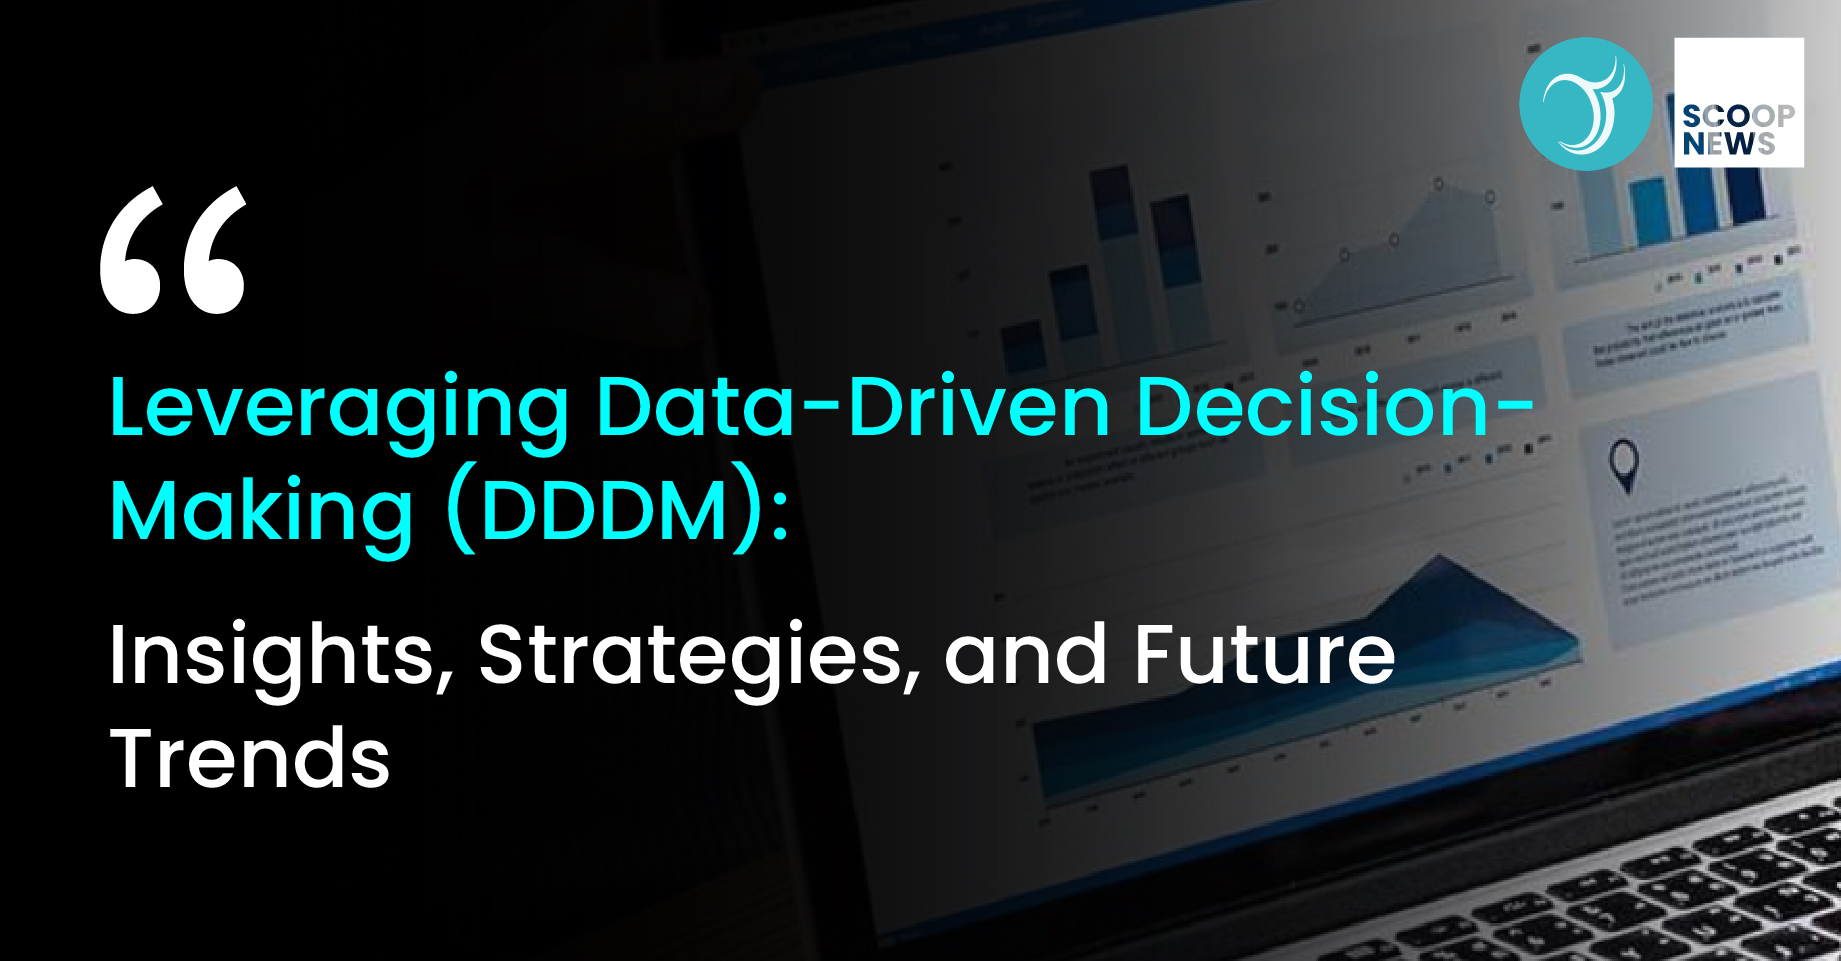 Leveraging Data-Driven Decision-Making (DDDM): Insights, Strategies, and Future Trends